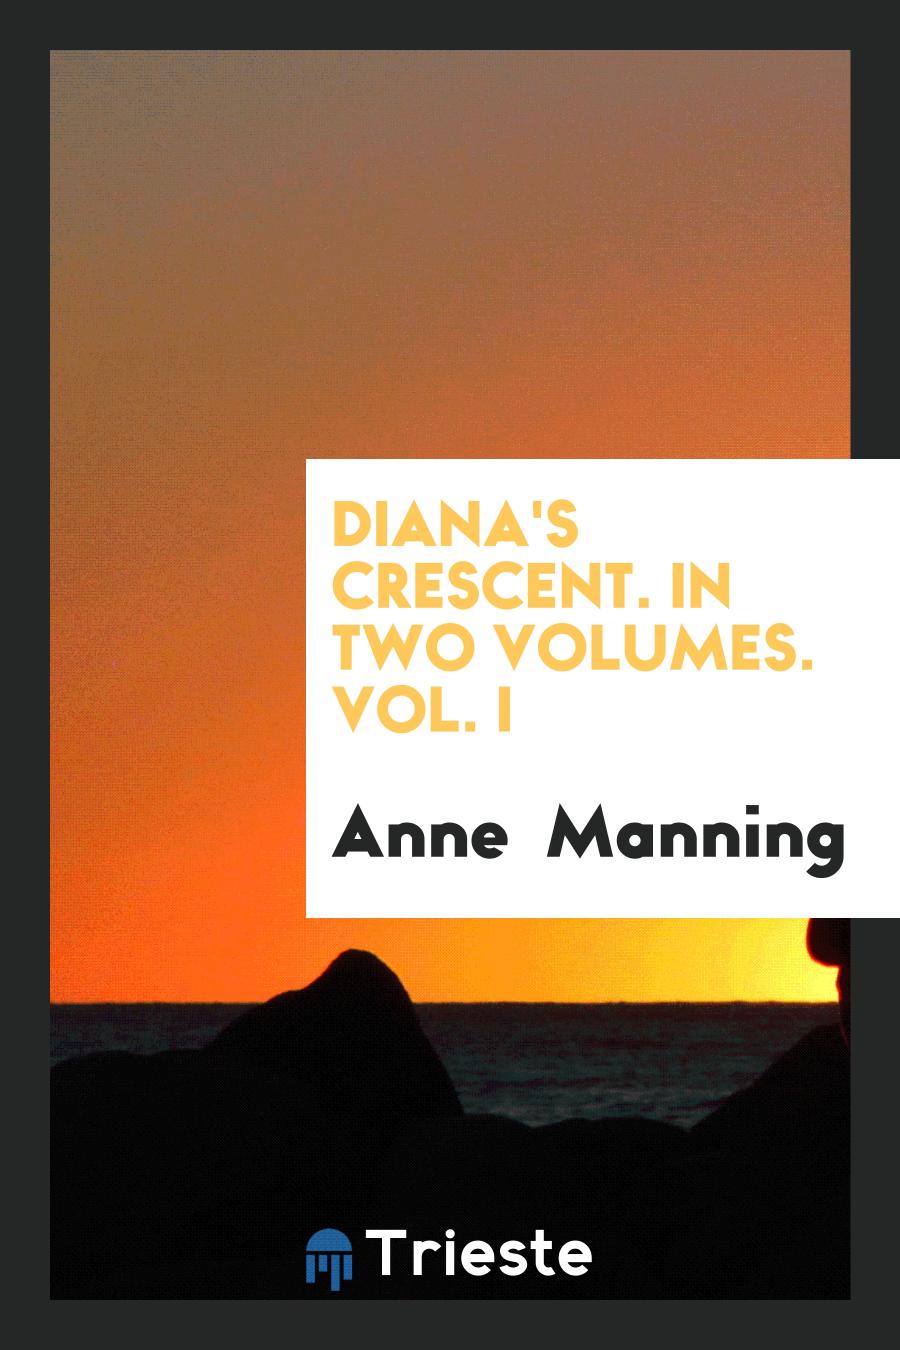 Anne Manning - Diana's Crescent. In Two Volumes. Vol. I